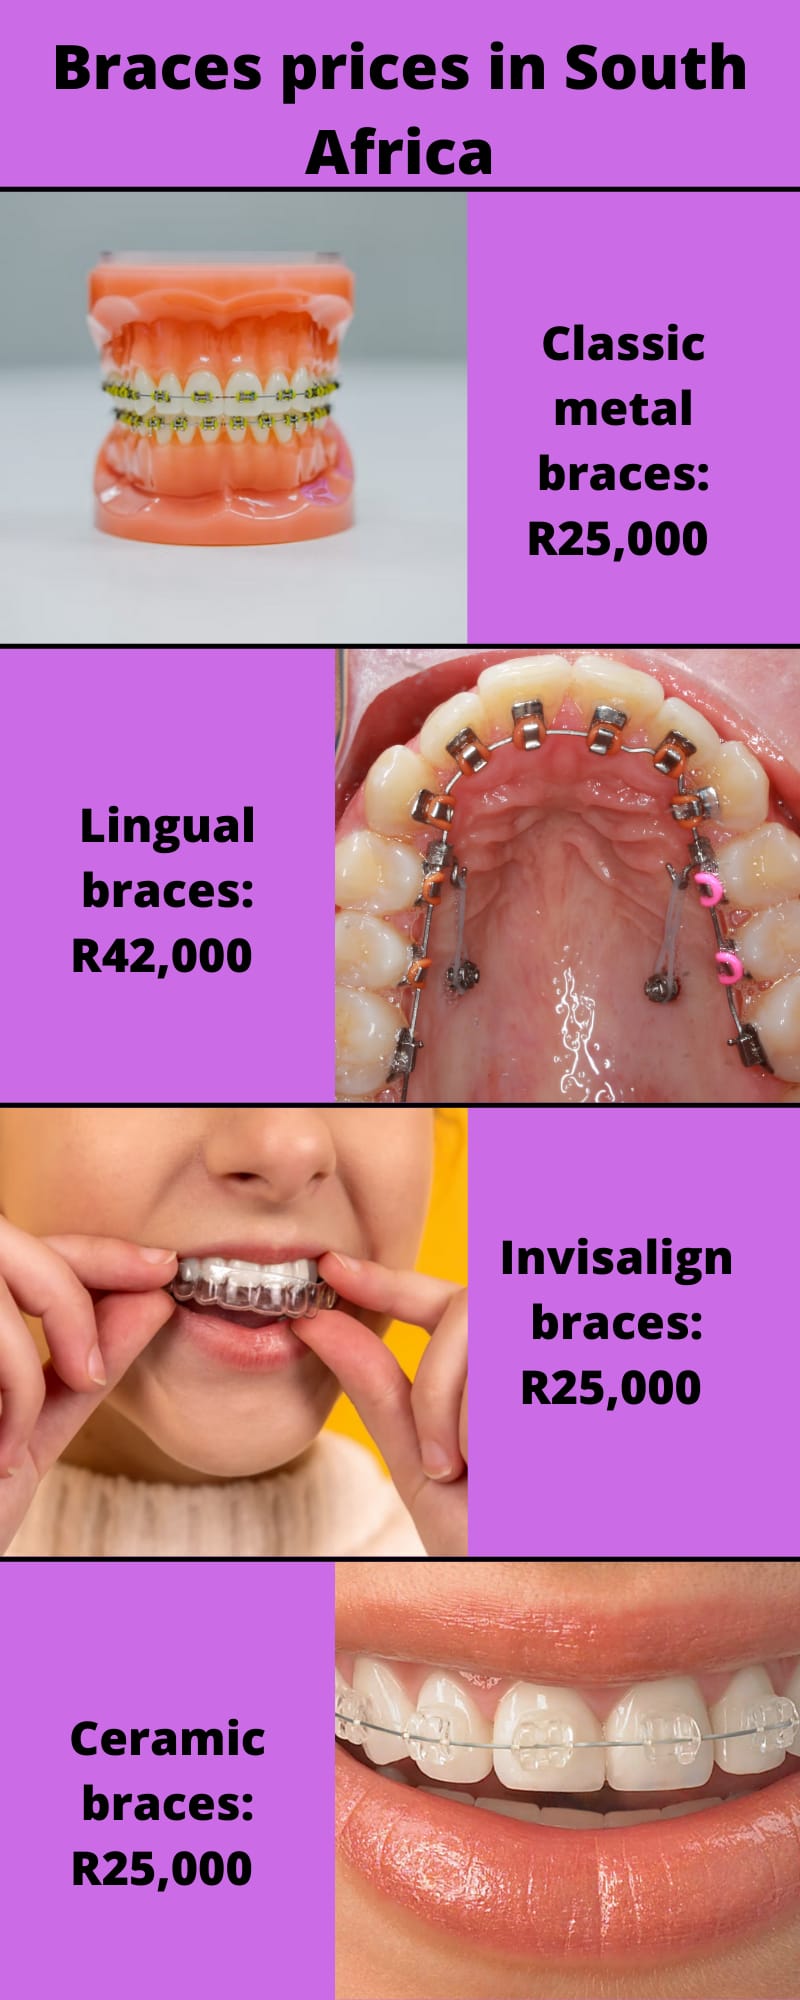 how much do braces cost in South Africa